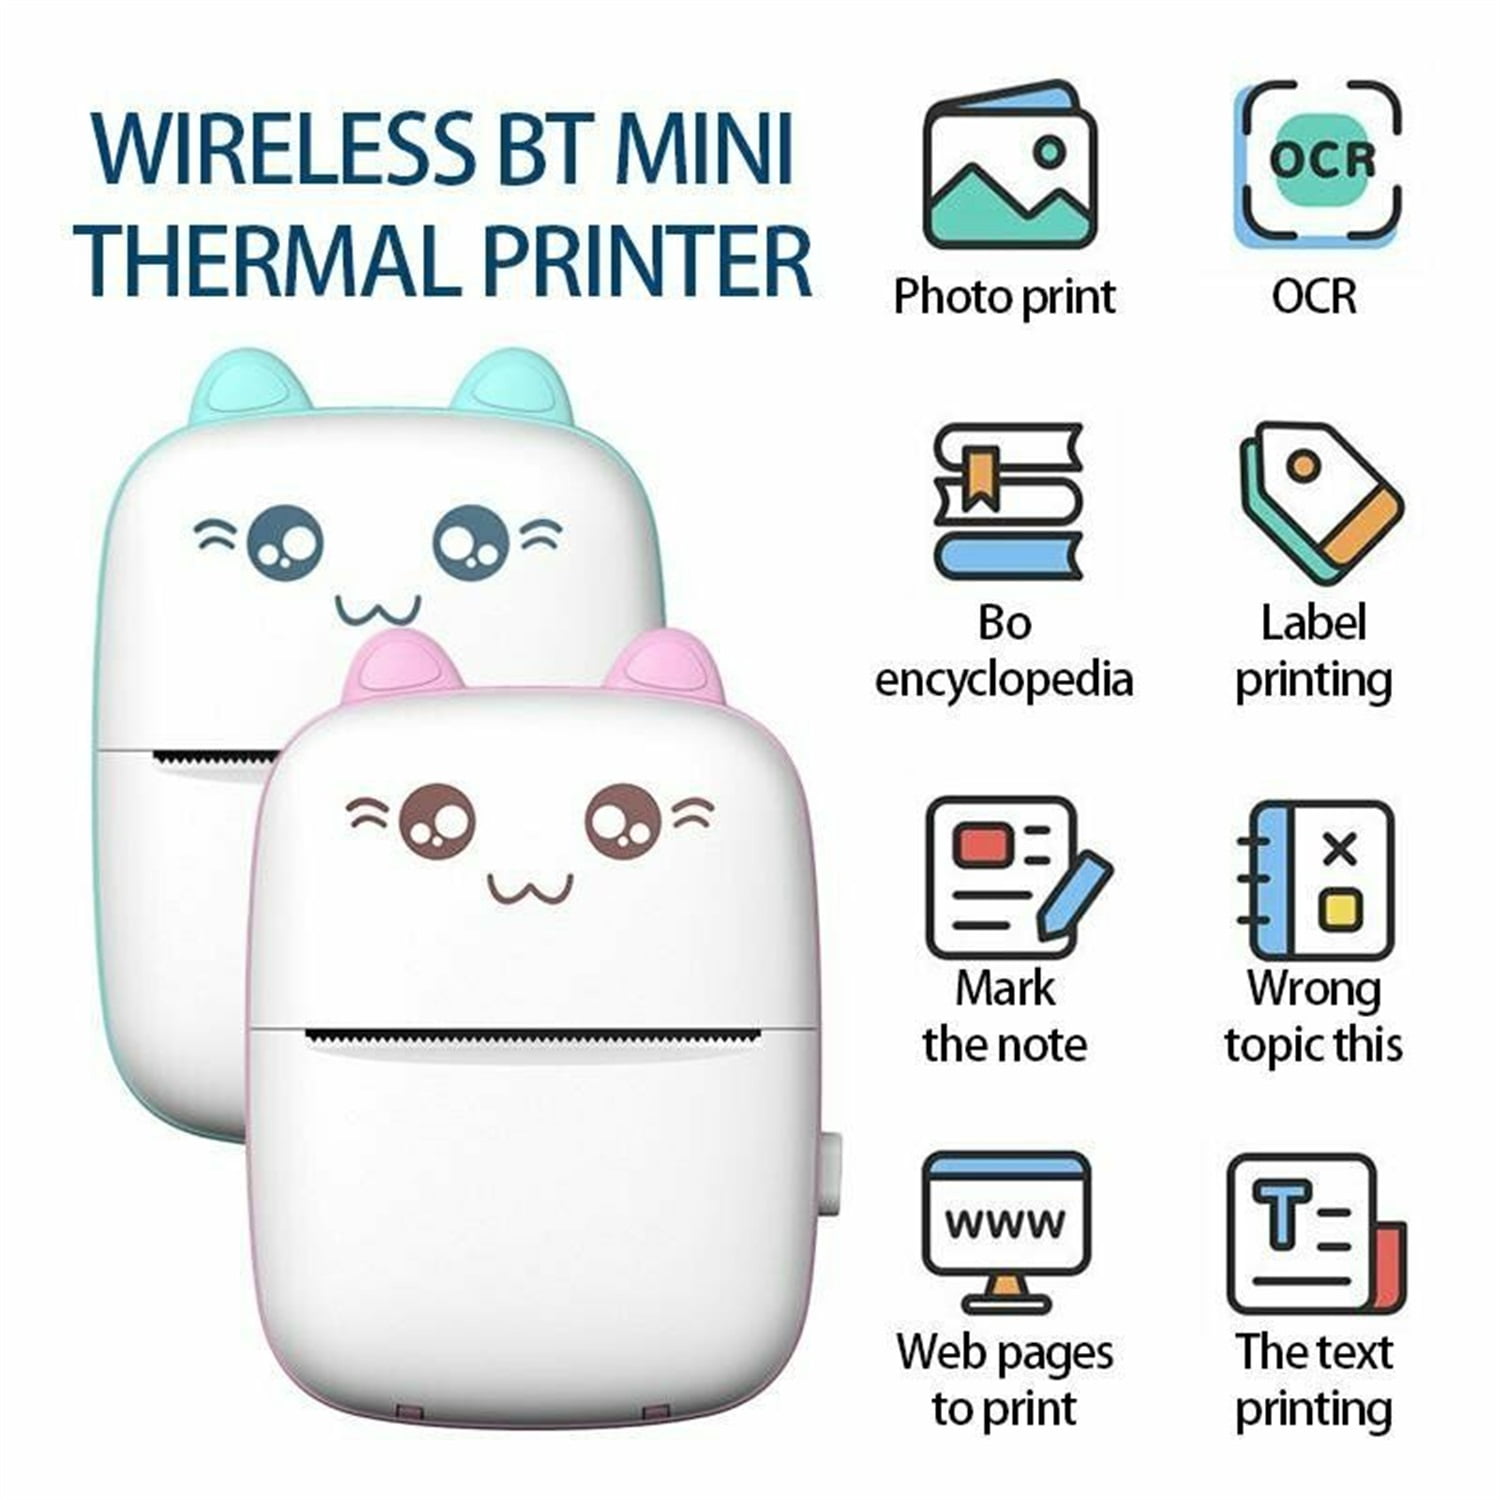 Handheld Printer Wireless Thermal Label Receipt Paper Notes Printer for All Smartphone with 6+1 Thermal Paper Rolls CNMF Mini Photo Printer Pocket Wireless Printer for iPhone 